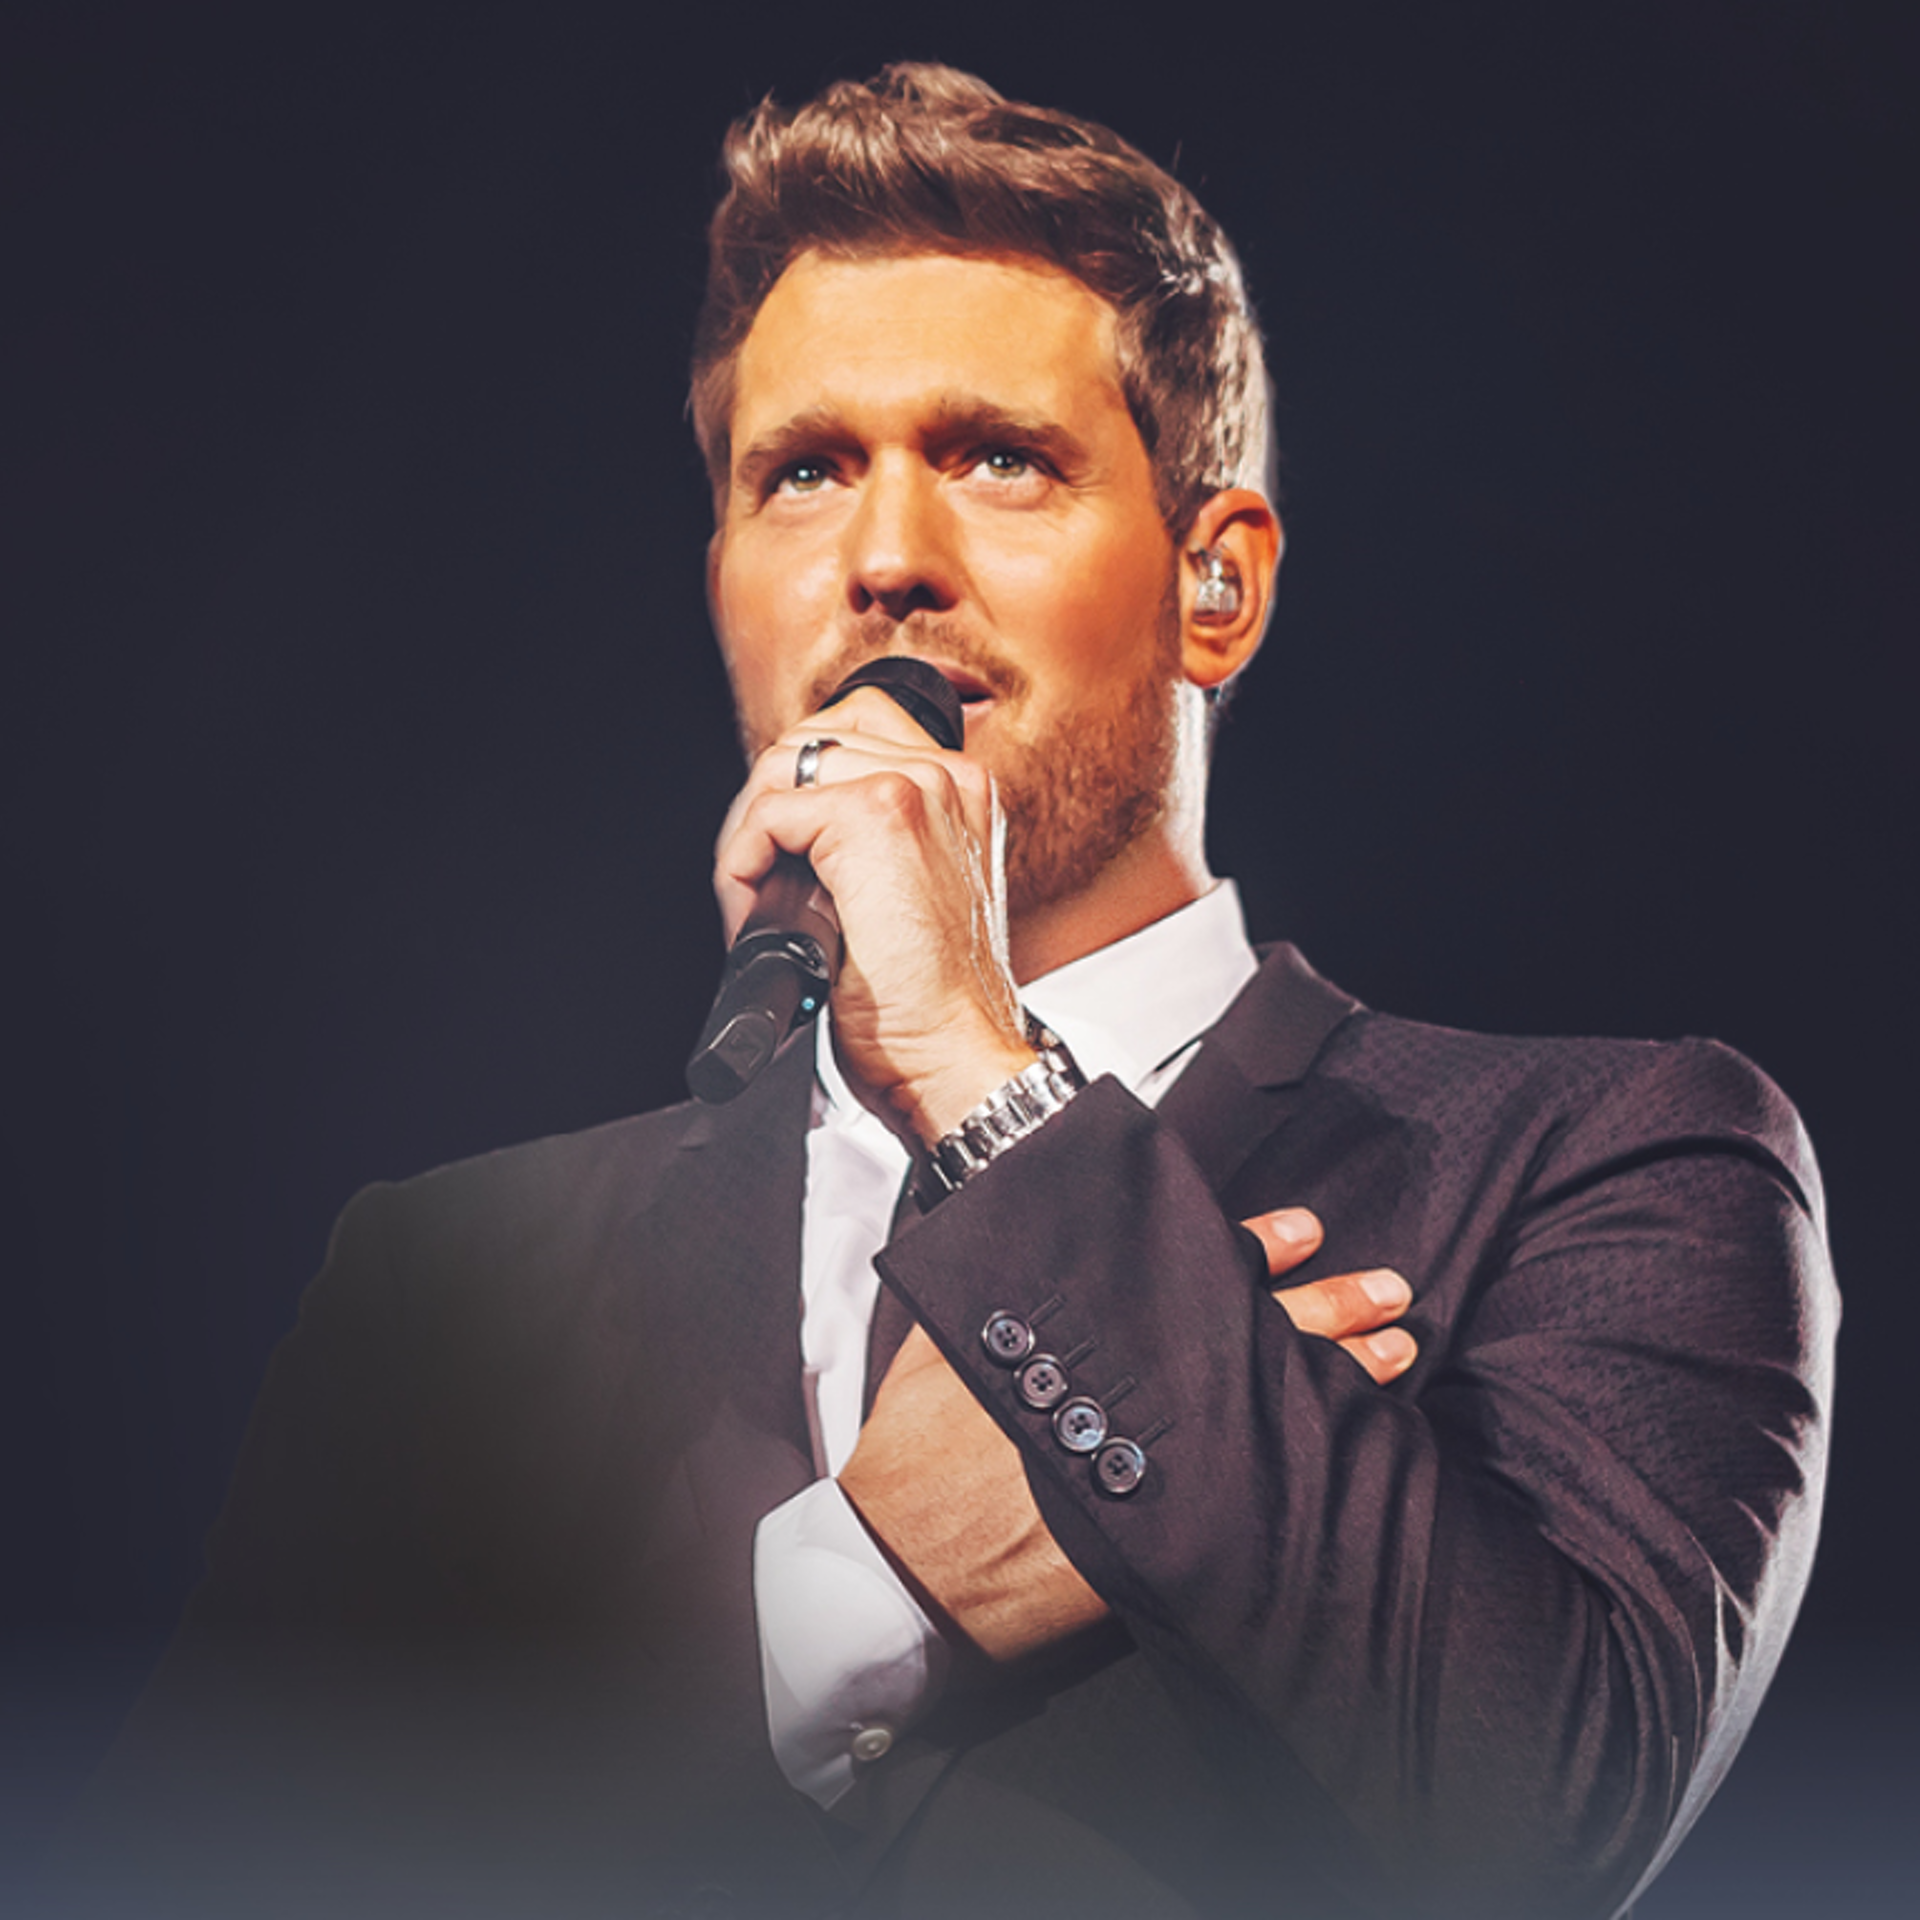 An Evening with Michael Buble